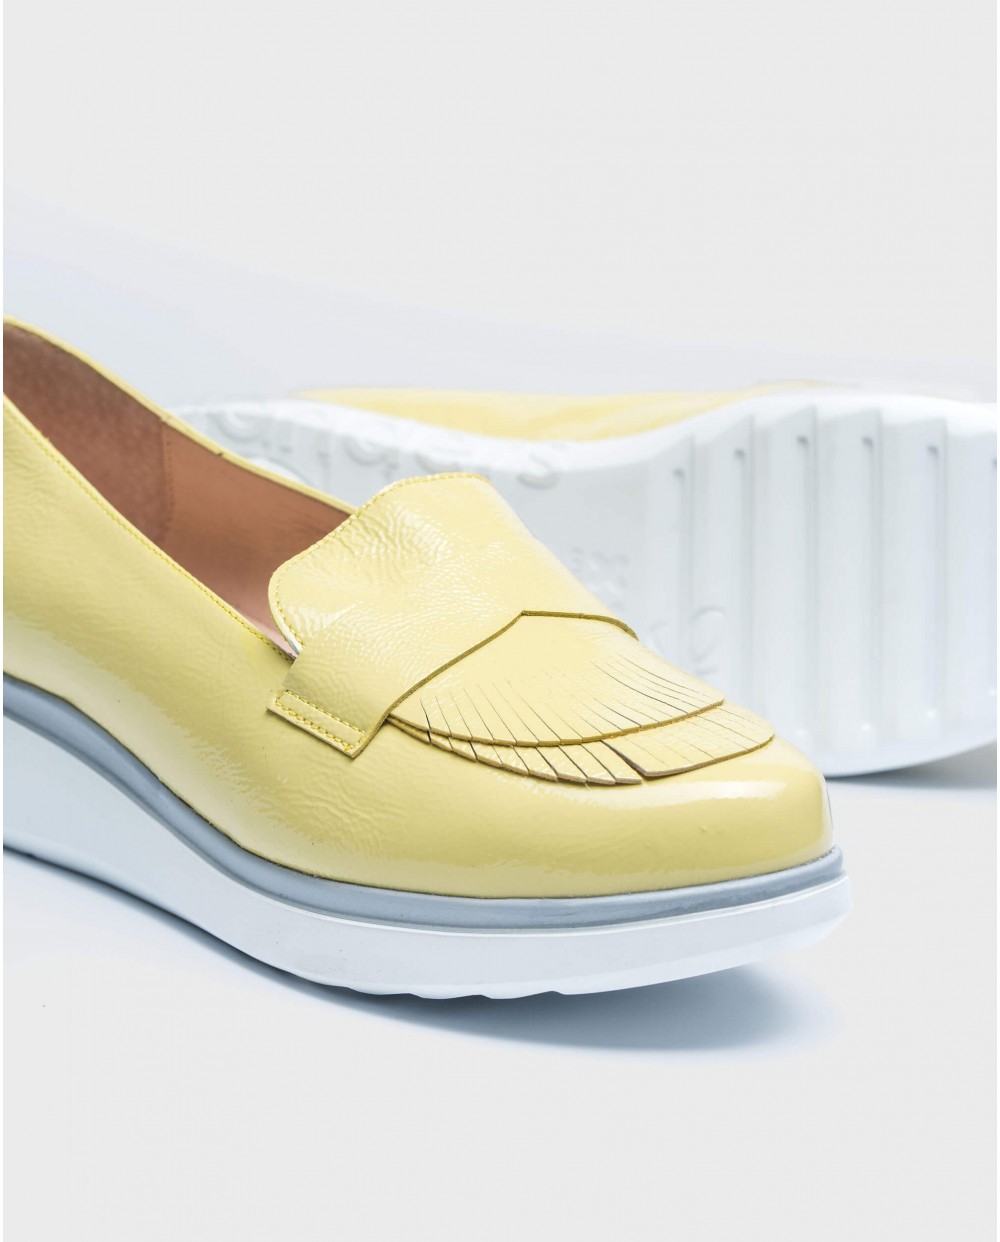 Wonders-Outlet-Patent leather moccasins with fringe detail